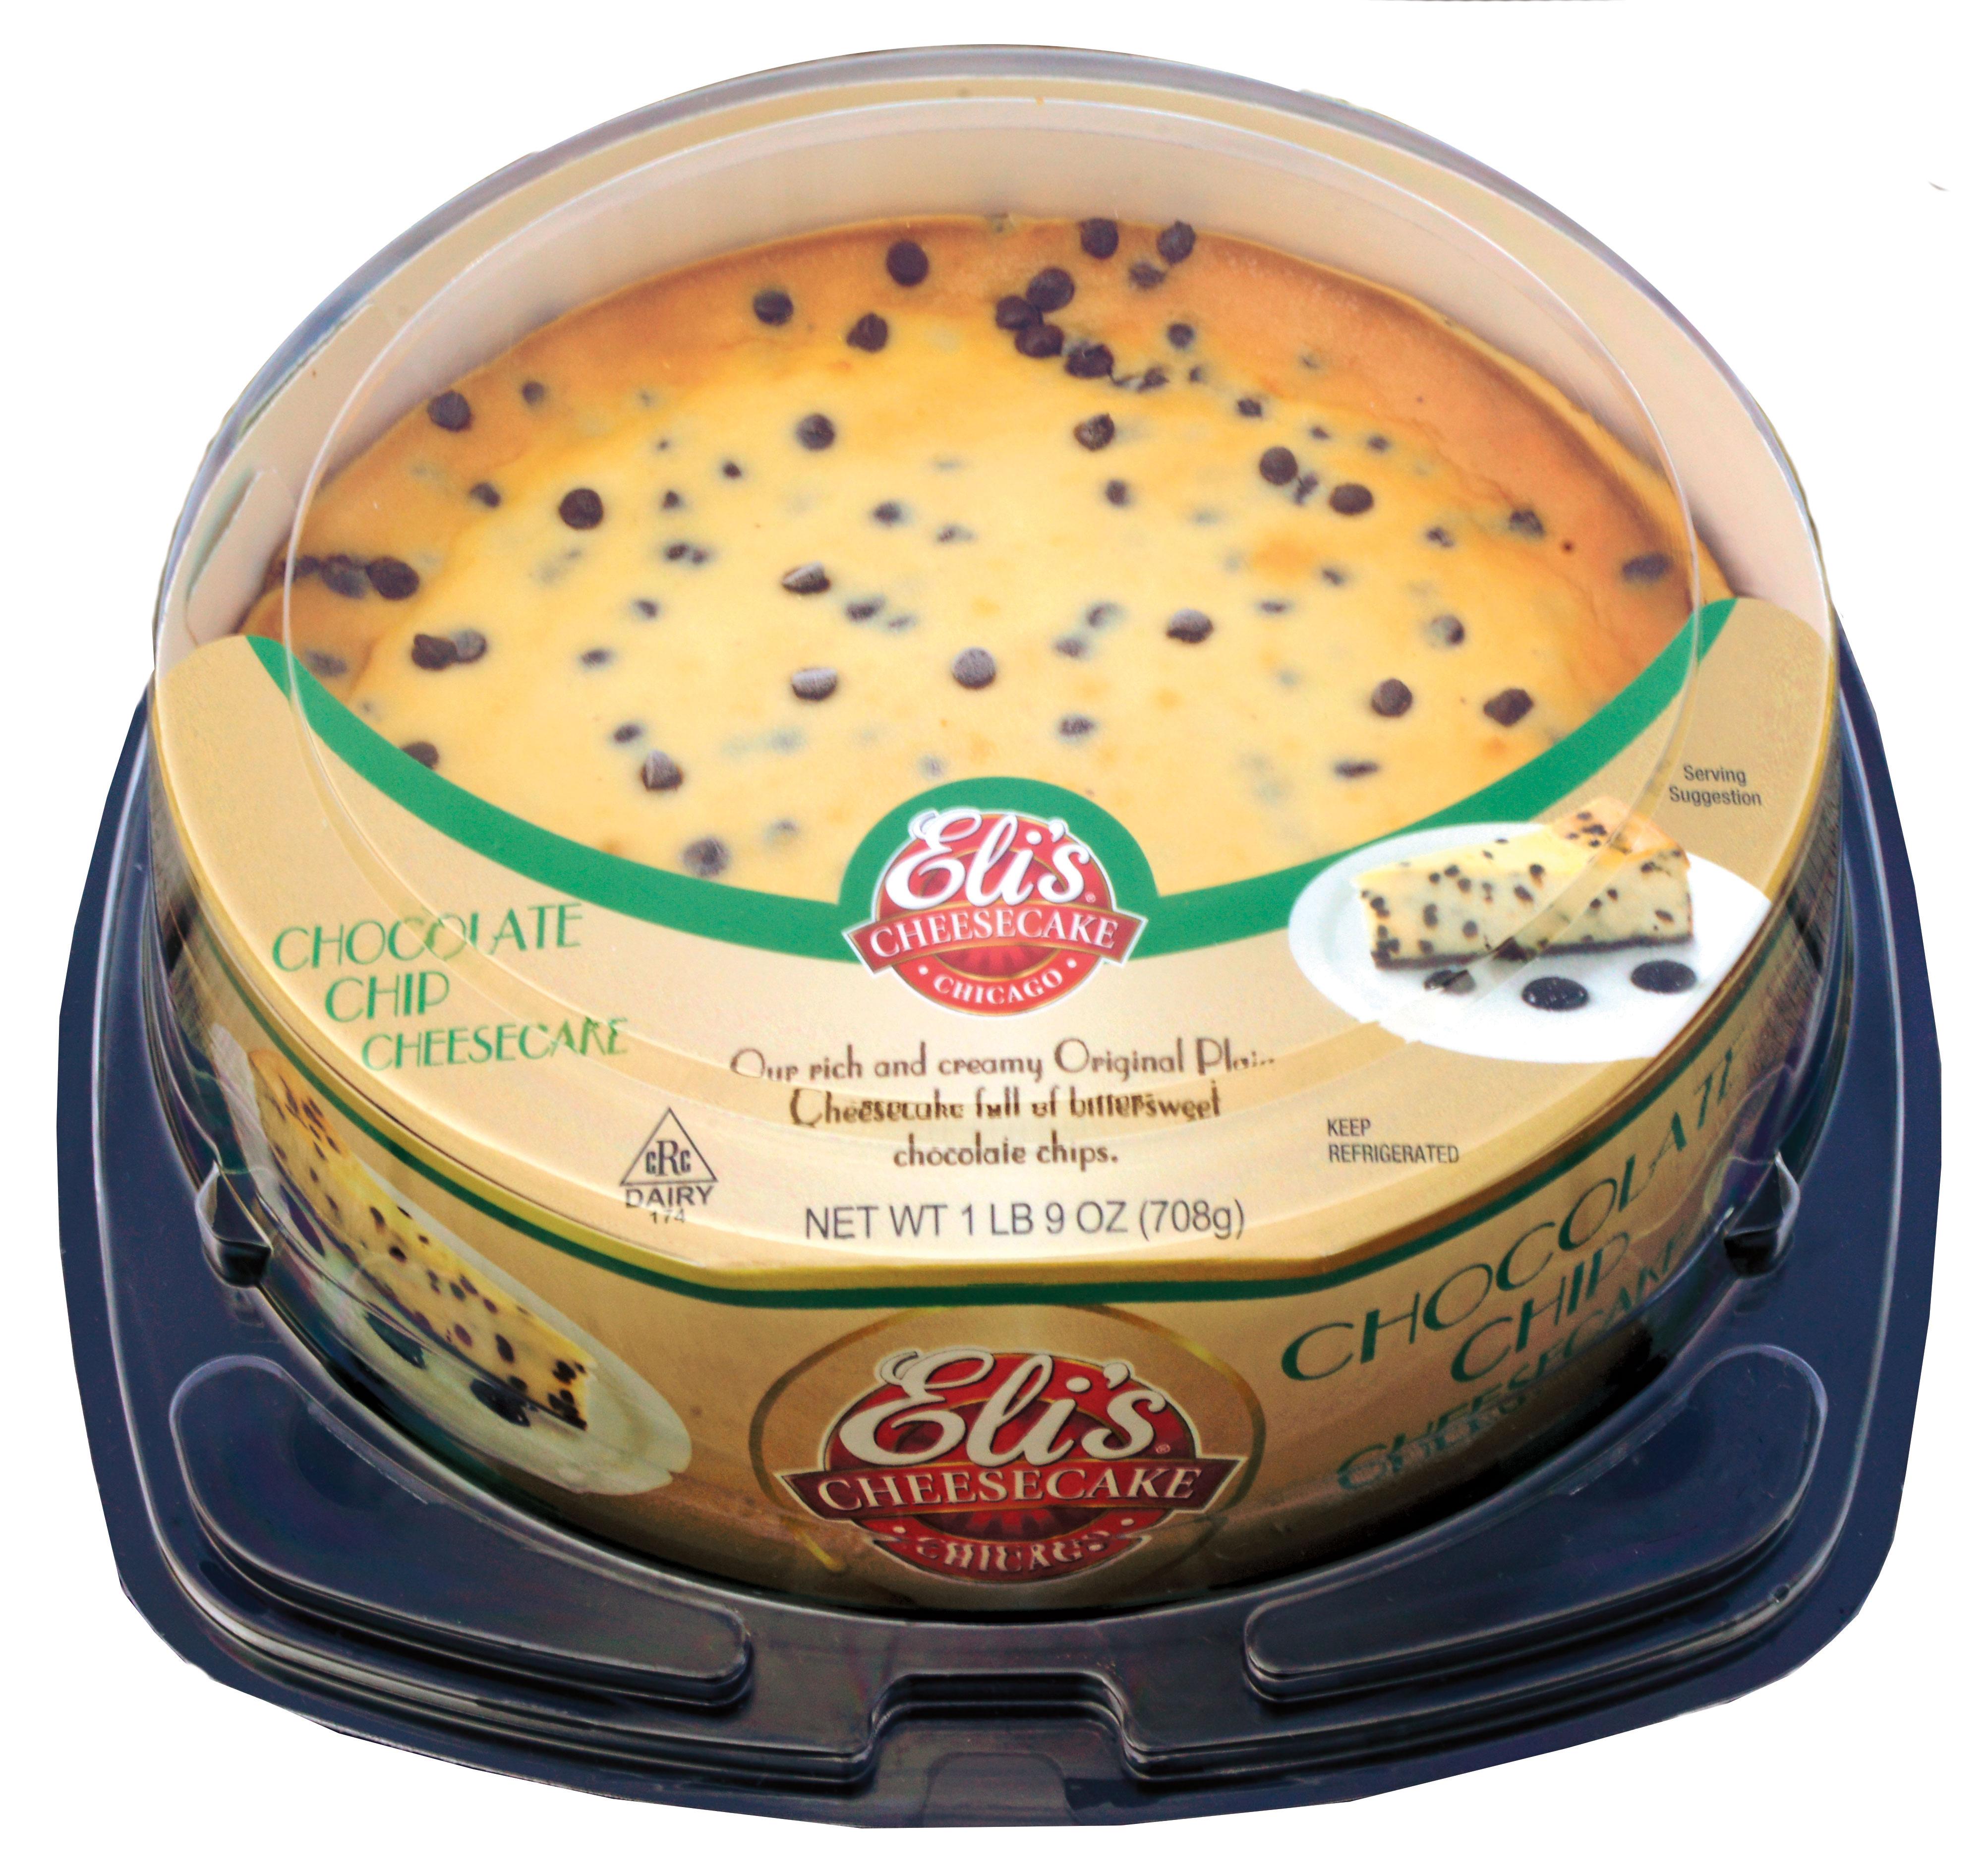 LIMITED TIME! Chocolate Chip Cheesecake 5" serves 2-3